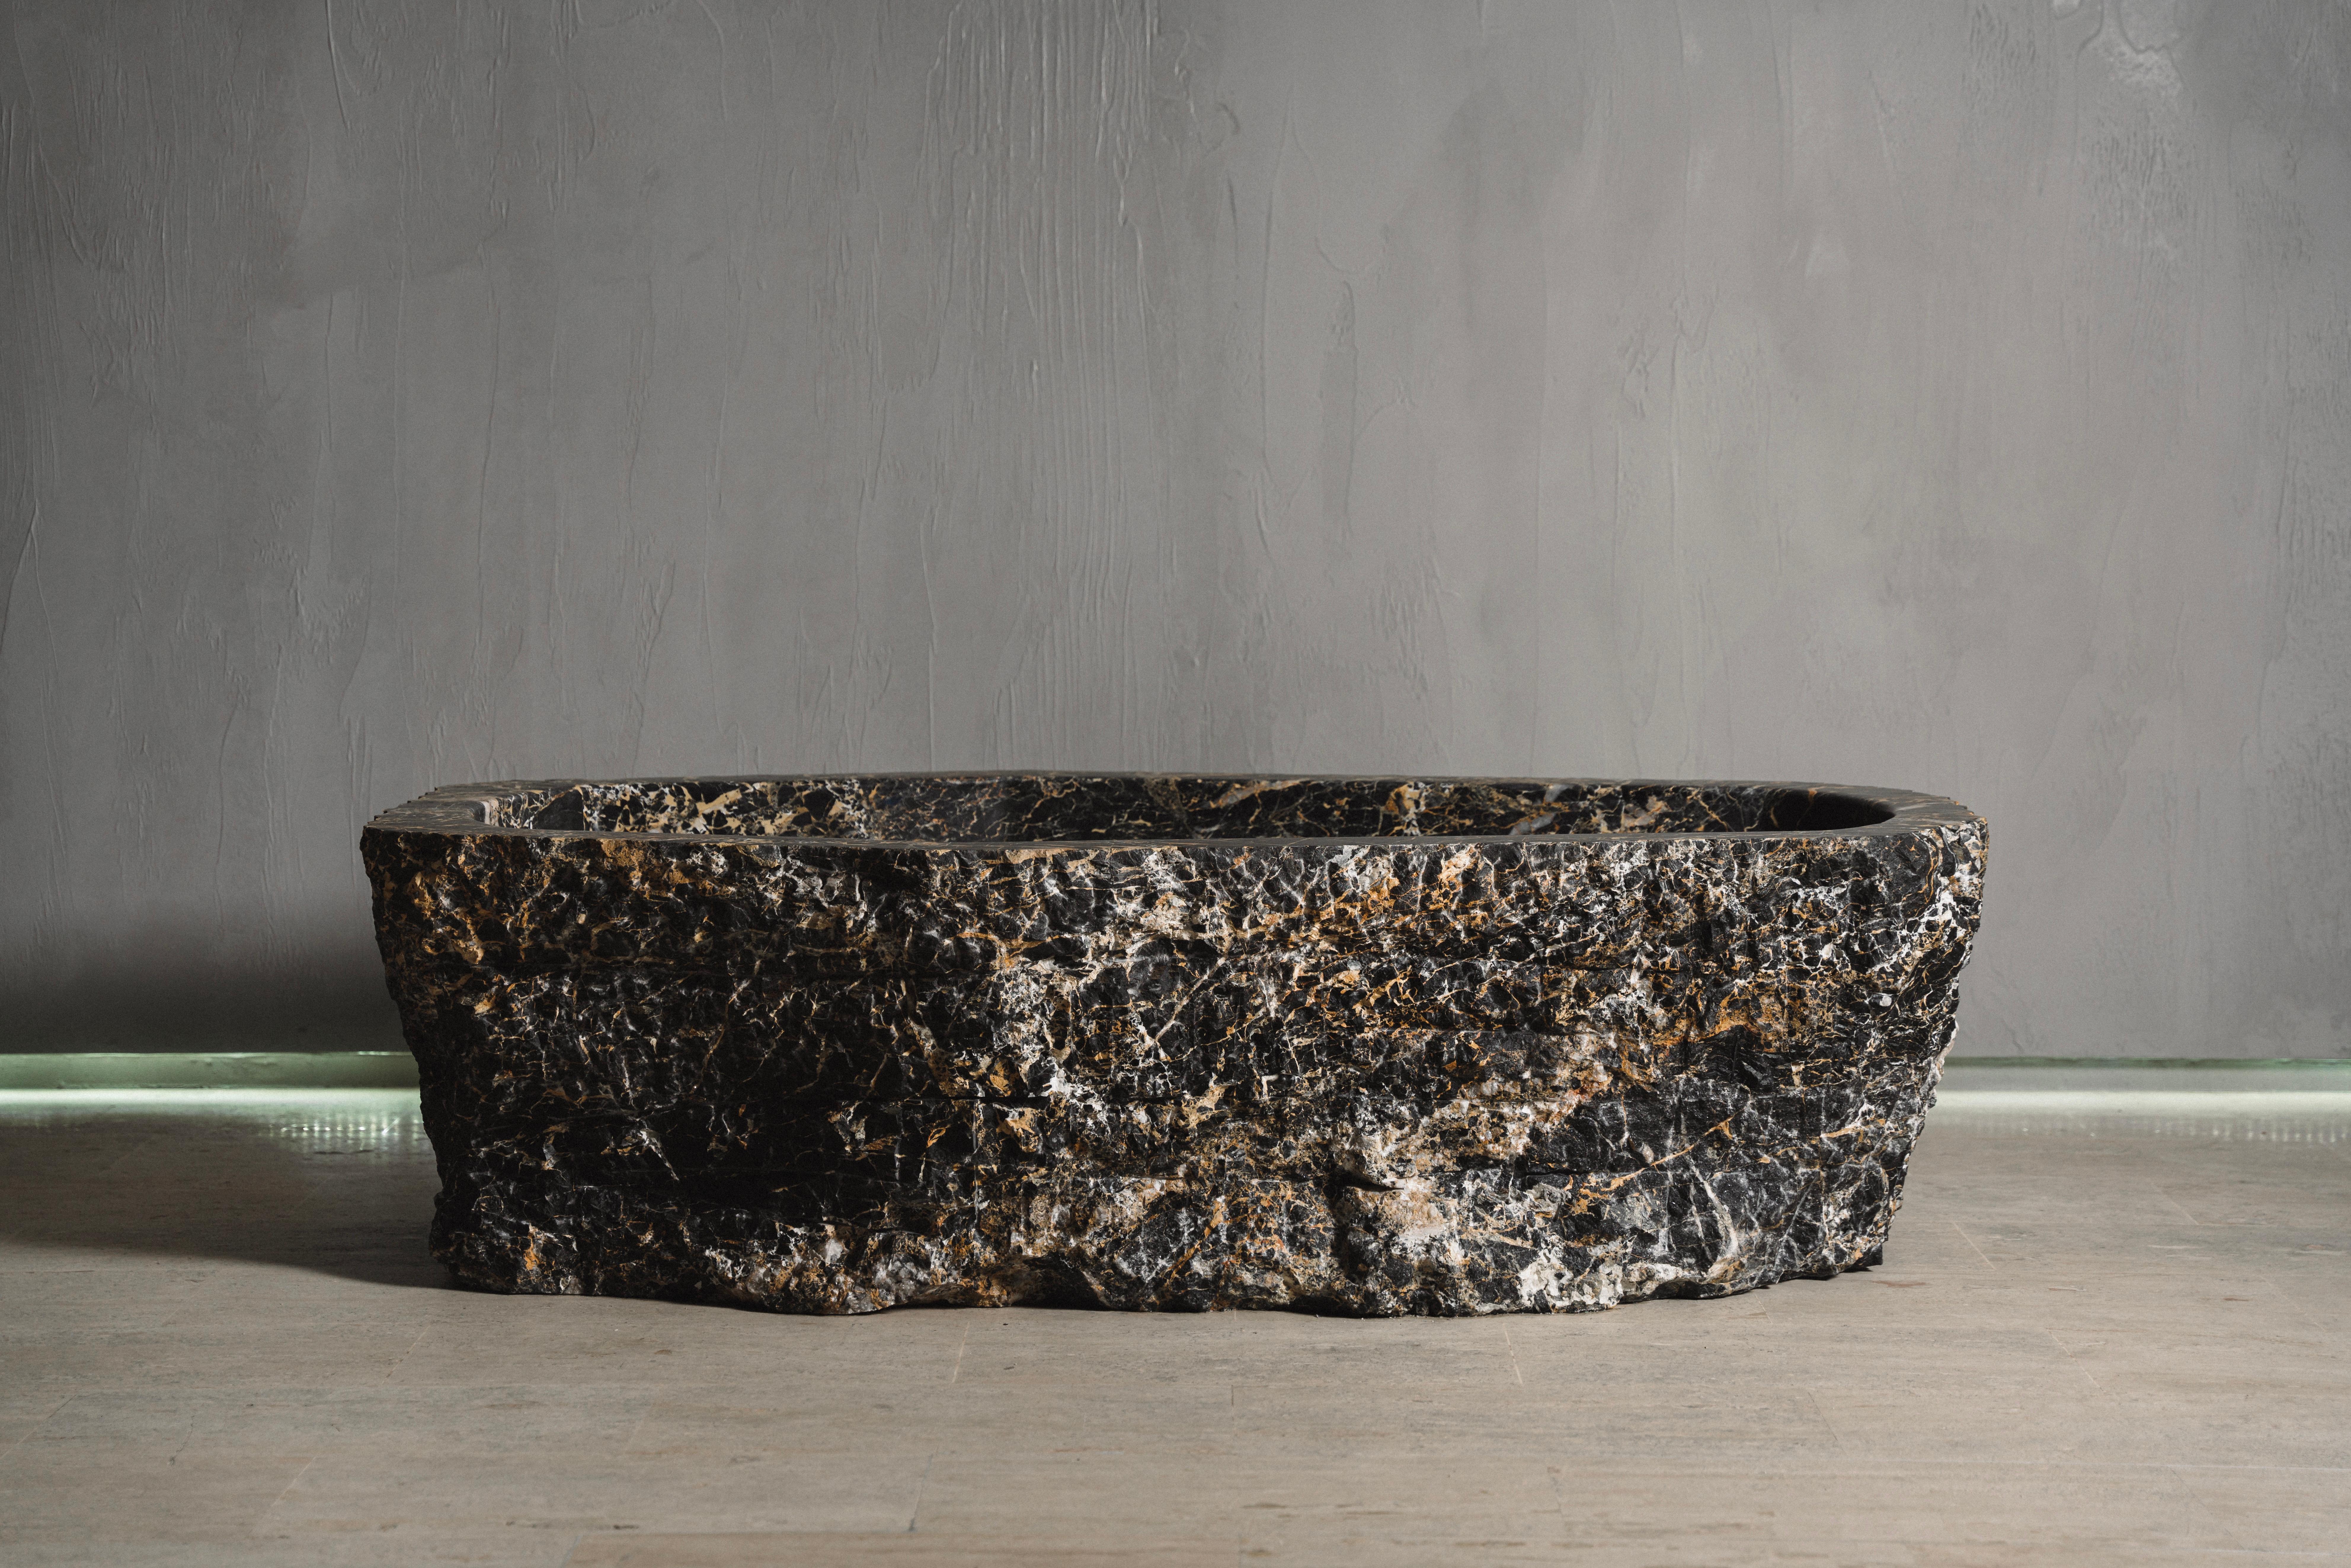 Baptiz Black Marble Bathtub by Andres Monnier
One of a Kind
Dimensions: D 110 x W 190 x H 50 cm.
Materials: Black marble, stainless steel.
Available in other stones.

Andrés Monnier is a Mexican artist born in Guadalajara and is based in